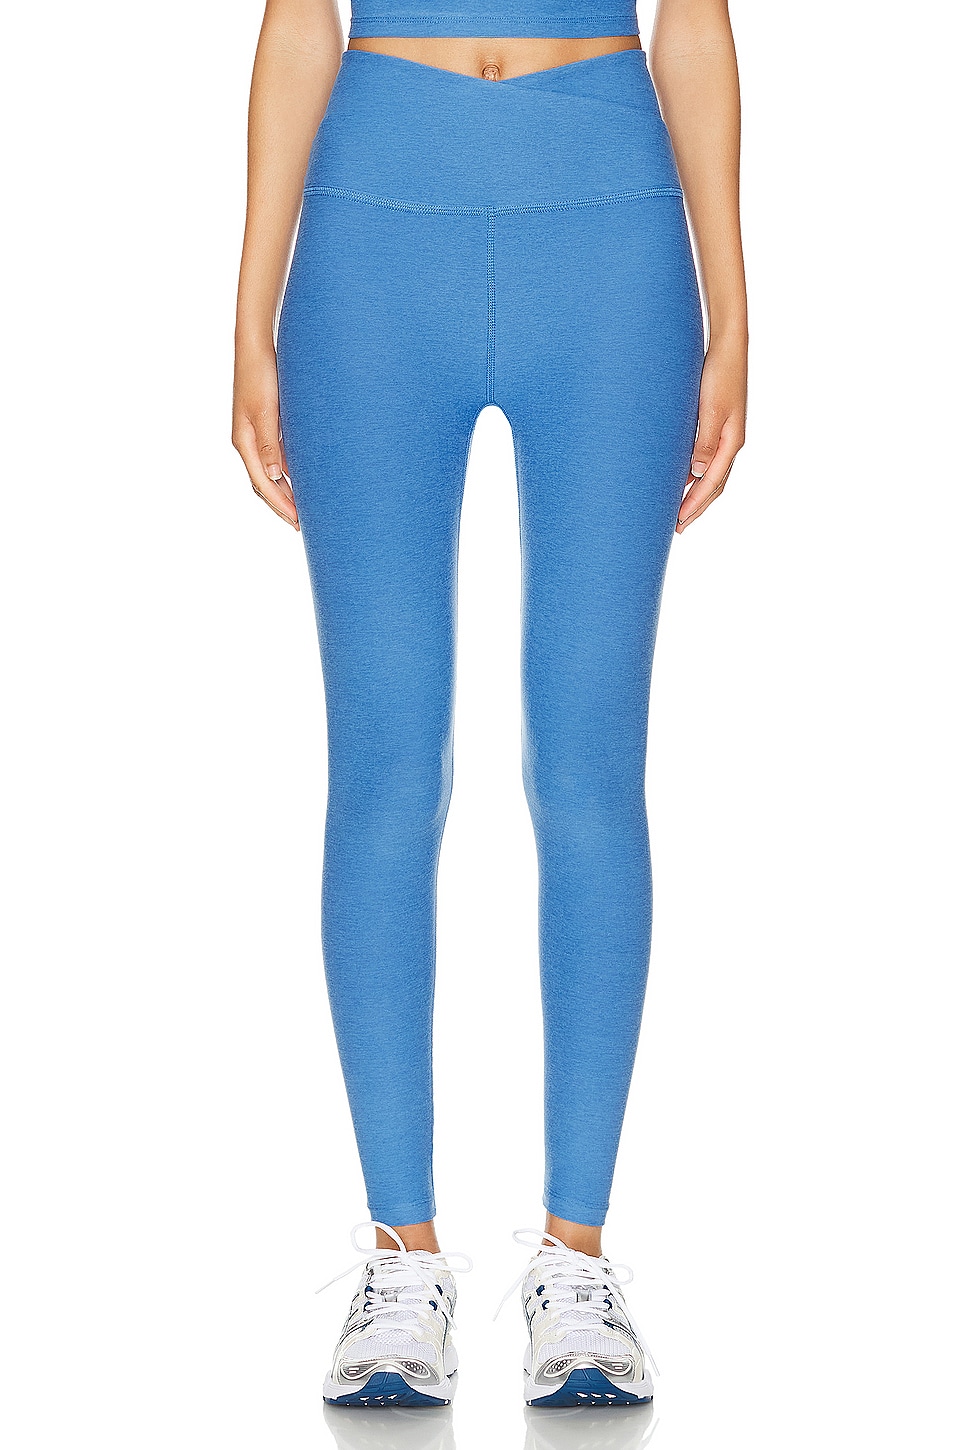 Image 1 of Beyond Yoga Spacedye At Your Leisure High Waisted Midi Legging in Sky Blue Heather